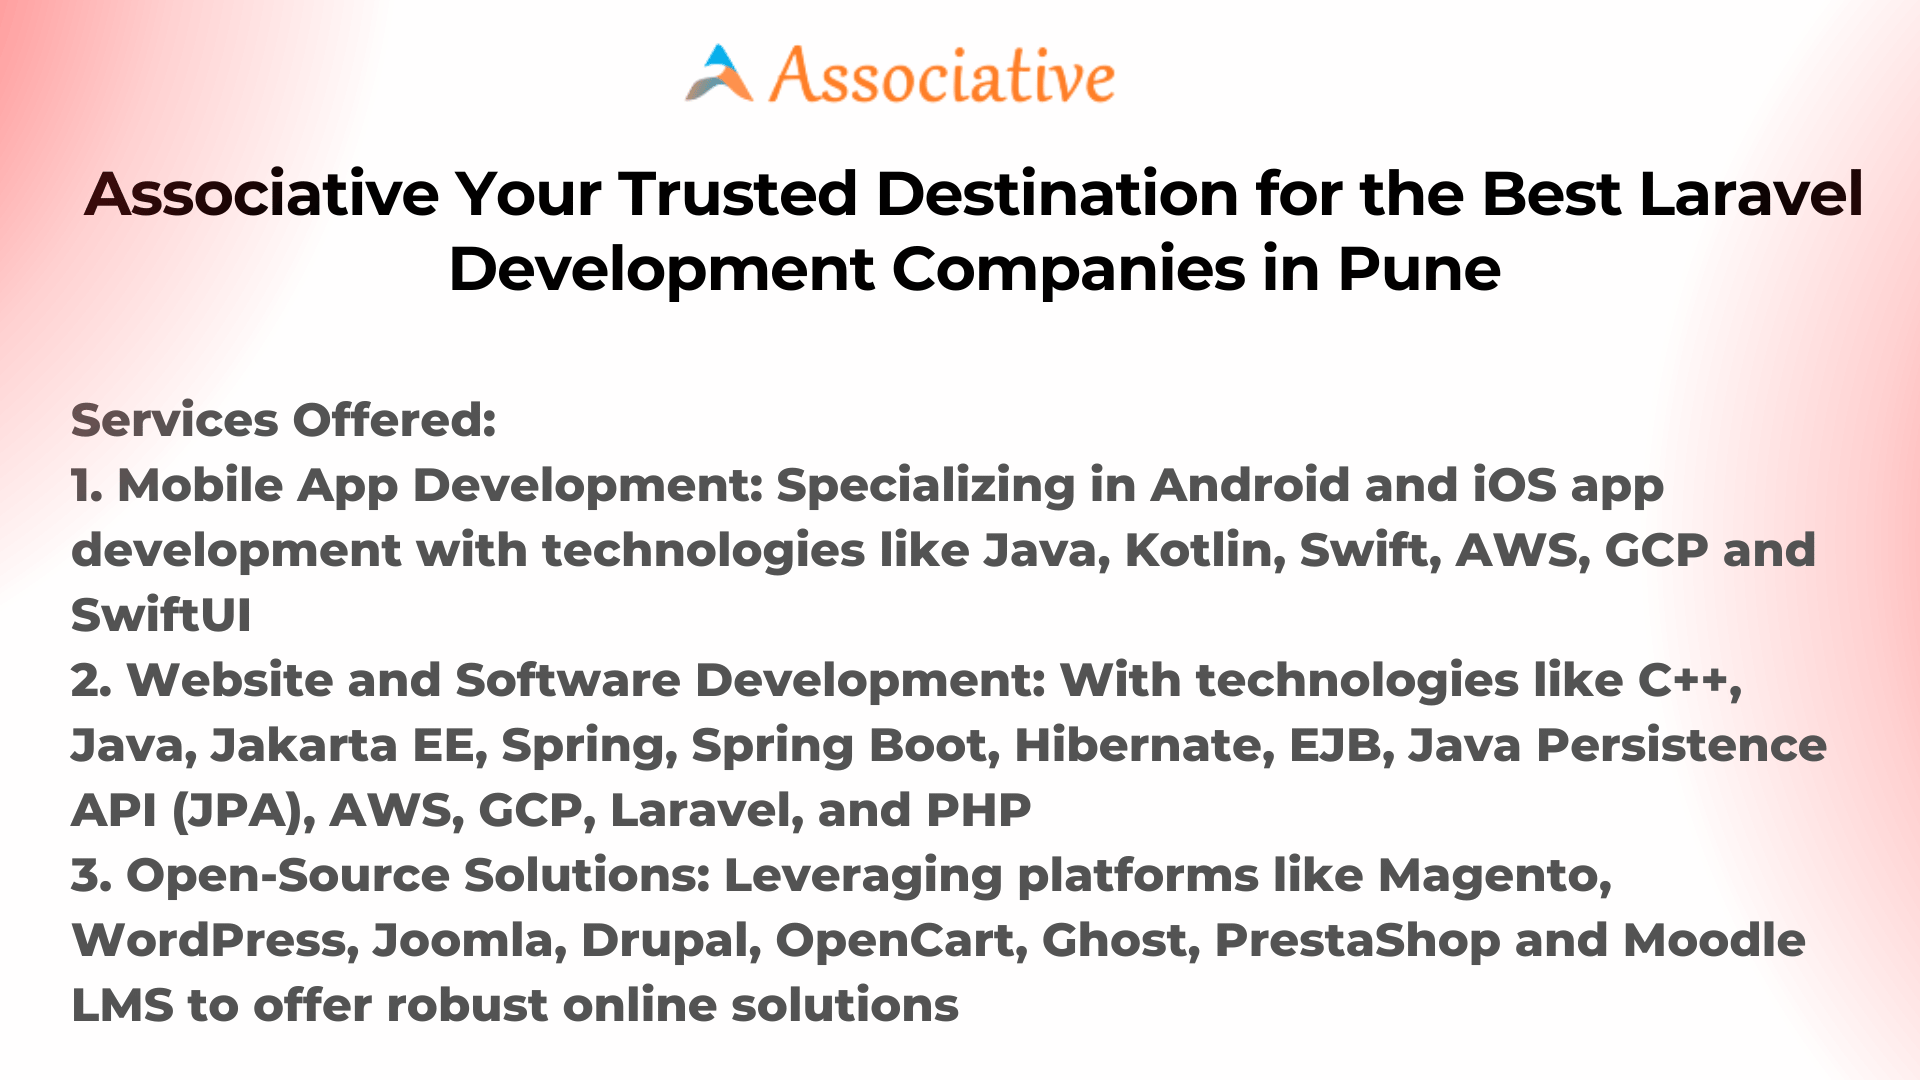 Associative Your Trusted Destination for the Best Laravel Development Companies in Pune